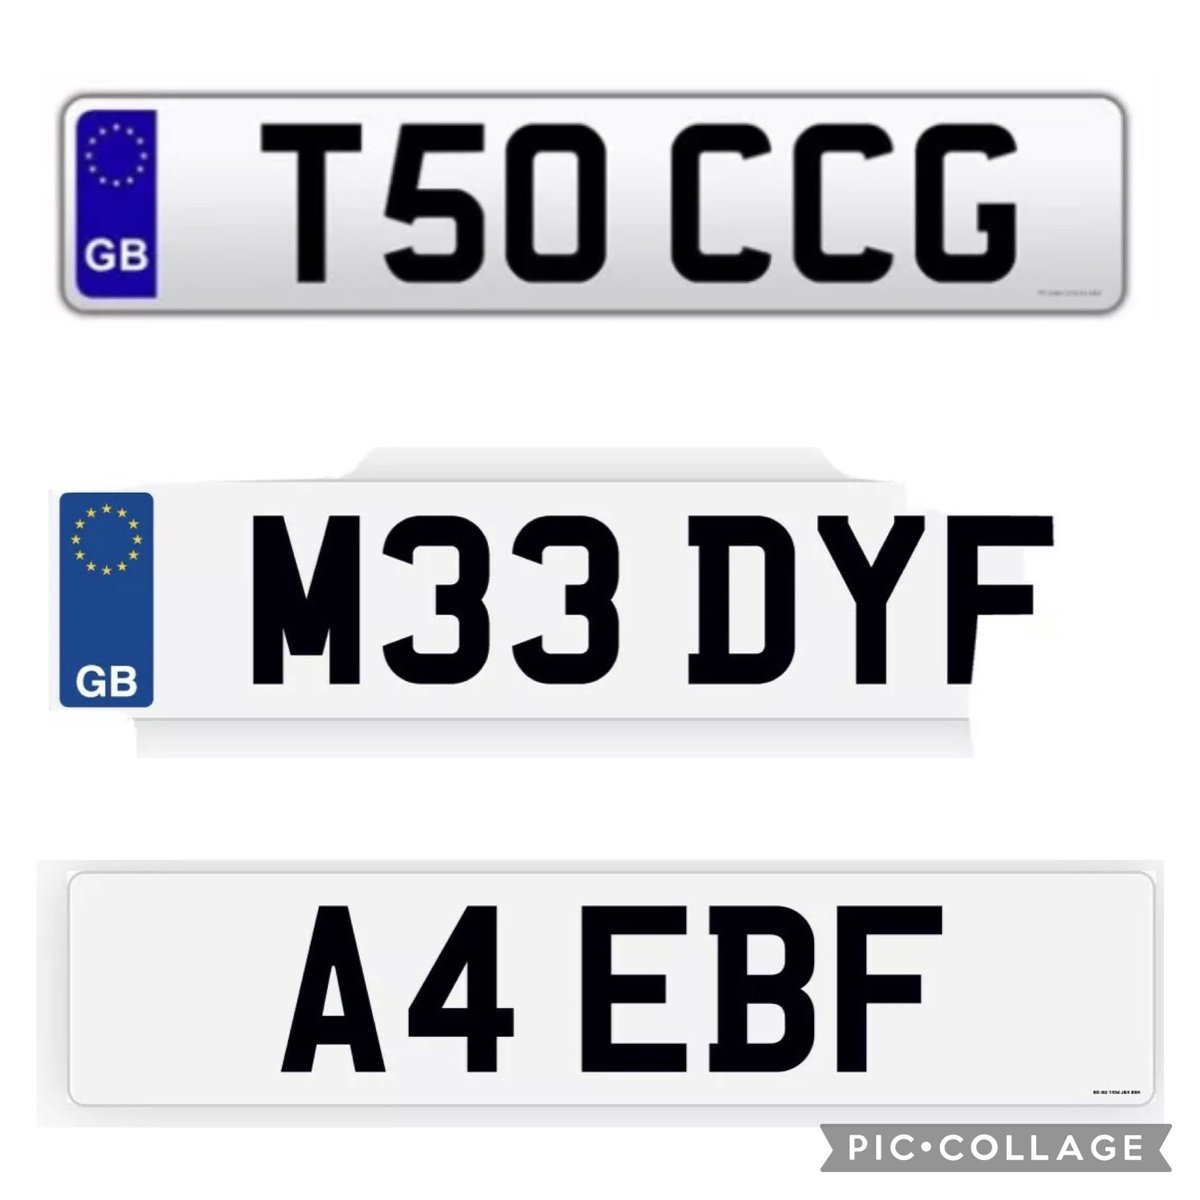 🚙 Personal registrations for sale 🚙
👍🏻 All on retention ready to go 👍🏻
💷 Assignment fee already paid 💷
💥 £499 ono each 💥
#privatereg #numberplate #privateplate #personalreg #cherishedplate #cherished